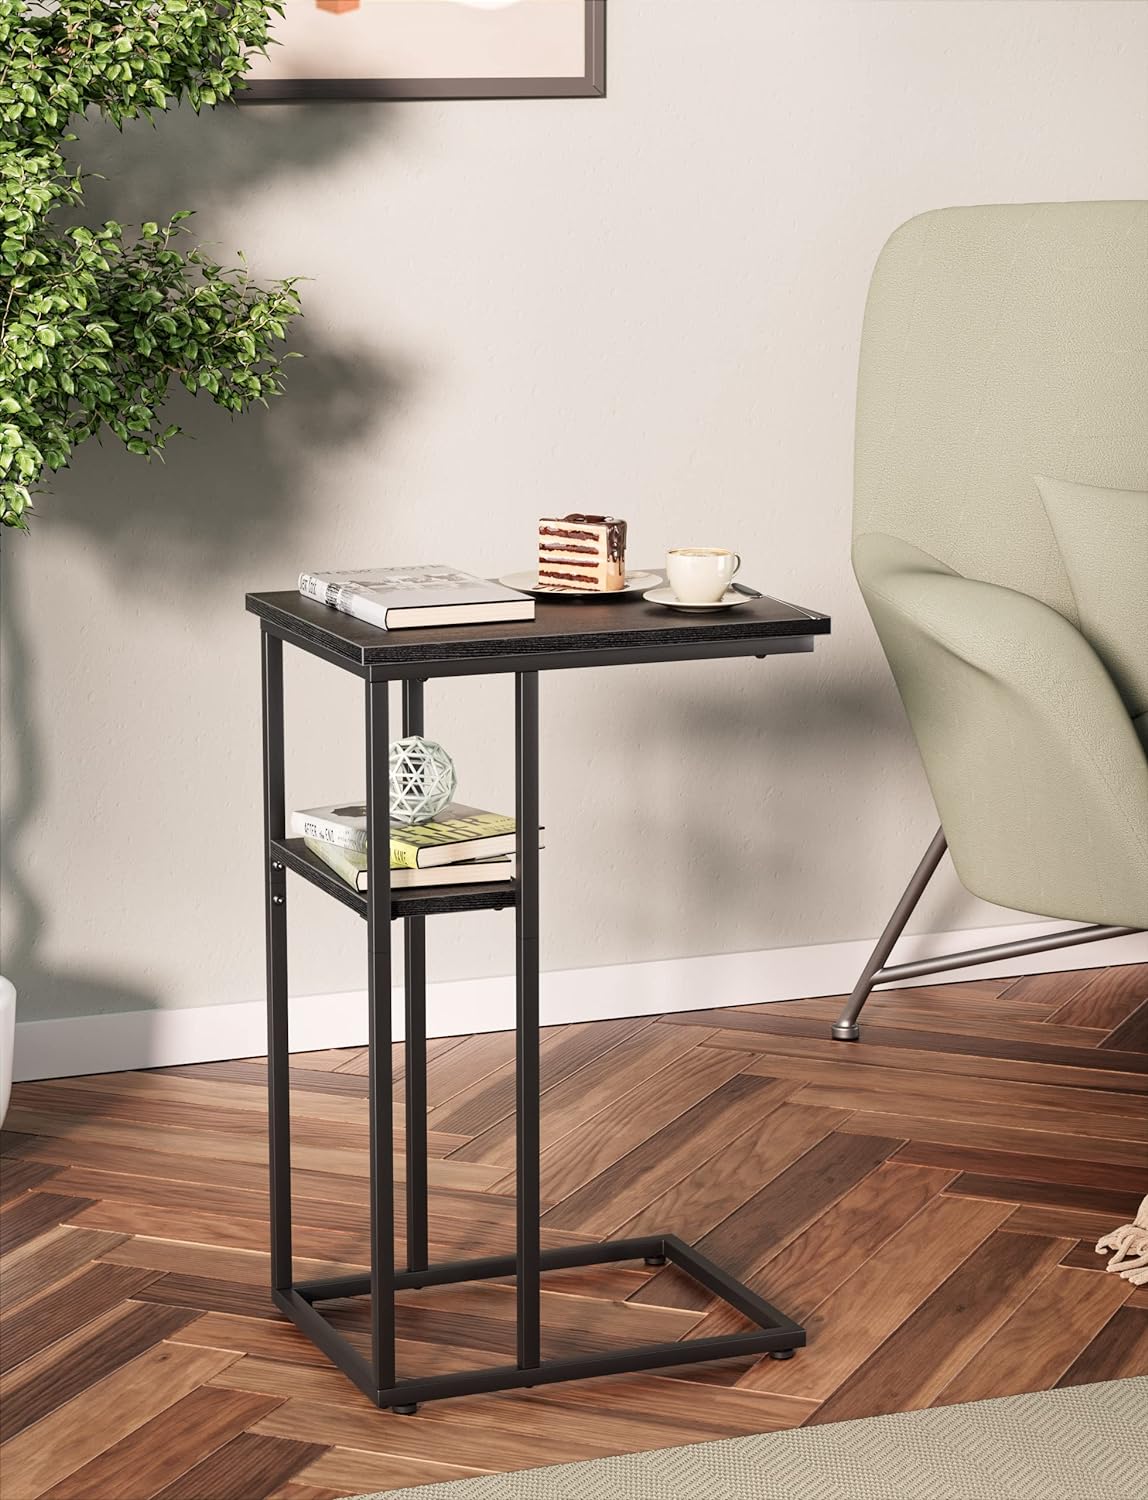 Innerjoin C Shaped Side Table